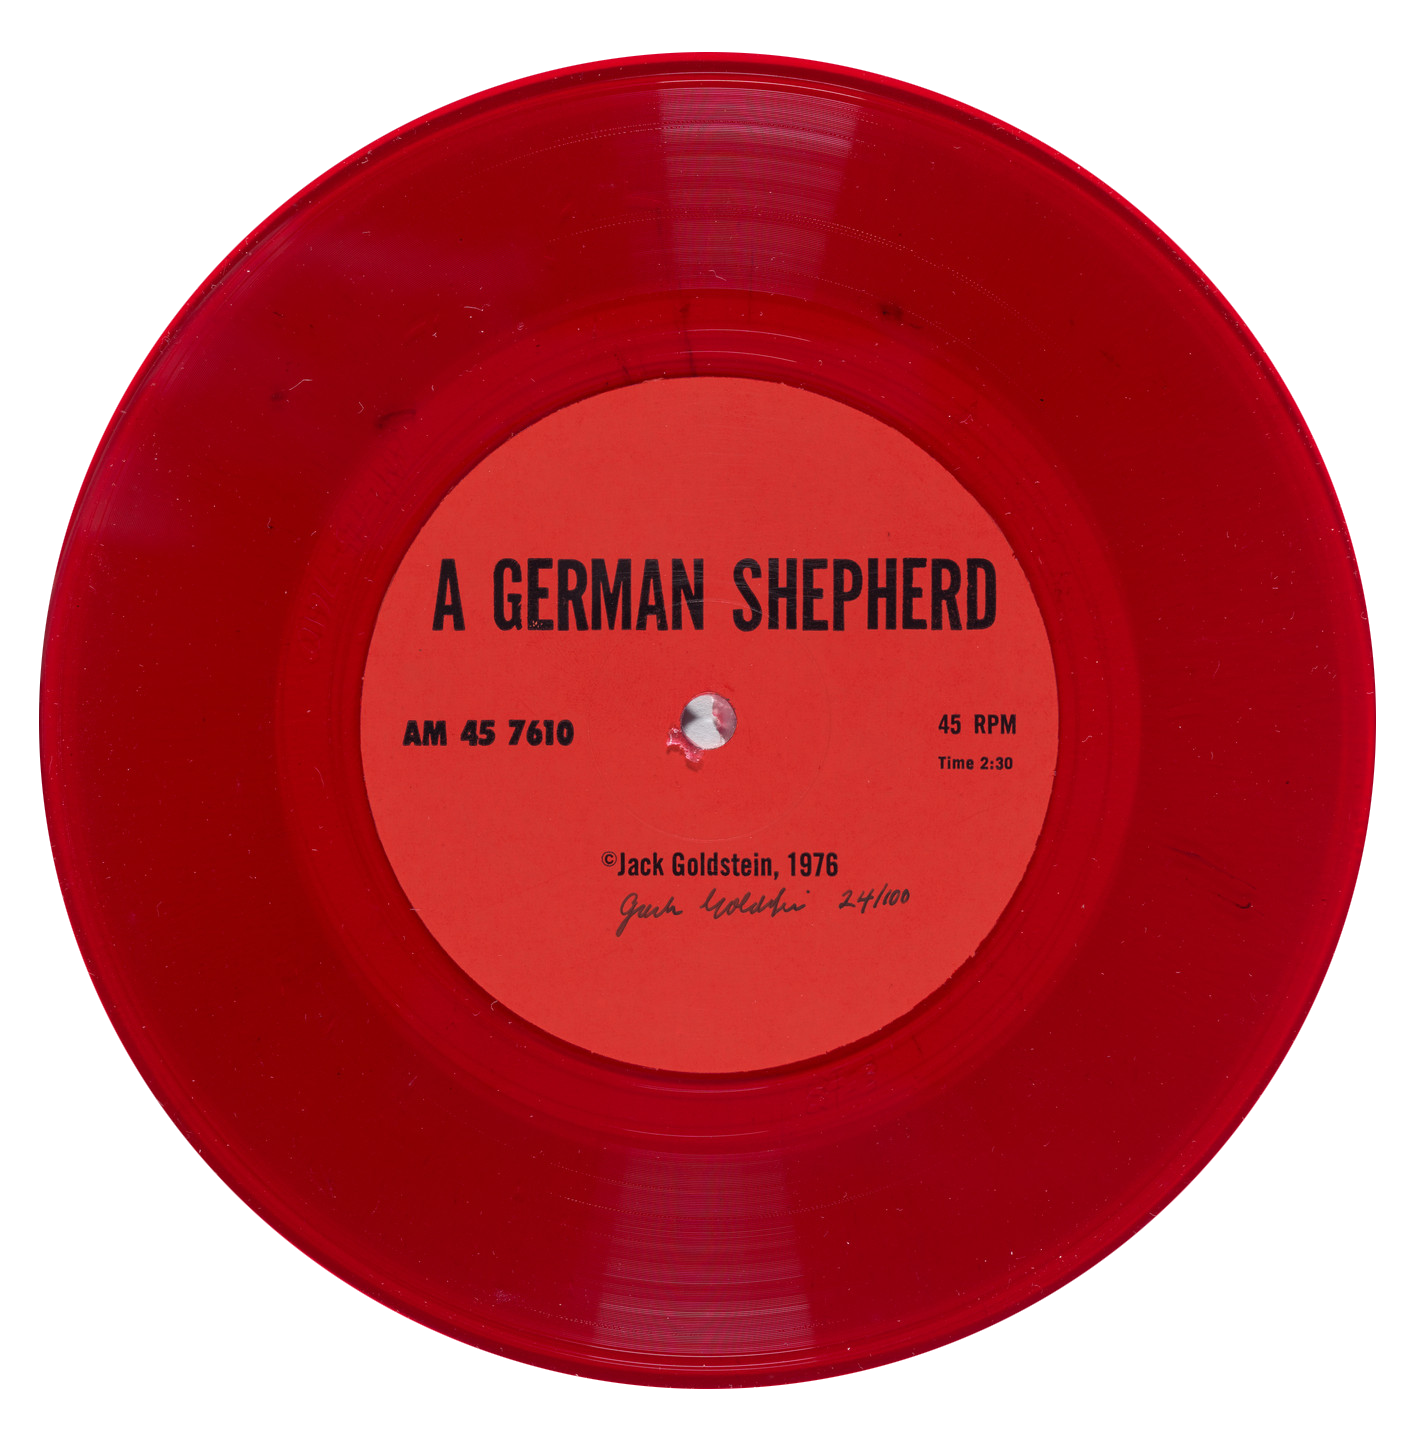  A GERMAN SHEPHERD 
Red vinyl - 45 rpm 7-inch record

A German Shepherd is one of the nine components of :
A Suite of Nine 45 rpm 7-Inch Records with Sound Effects
1976